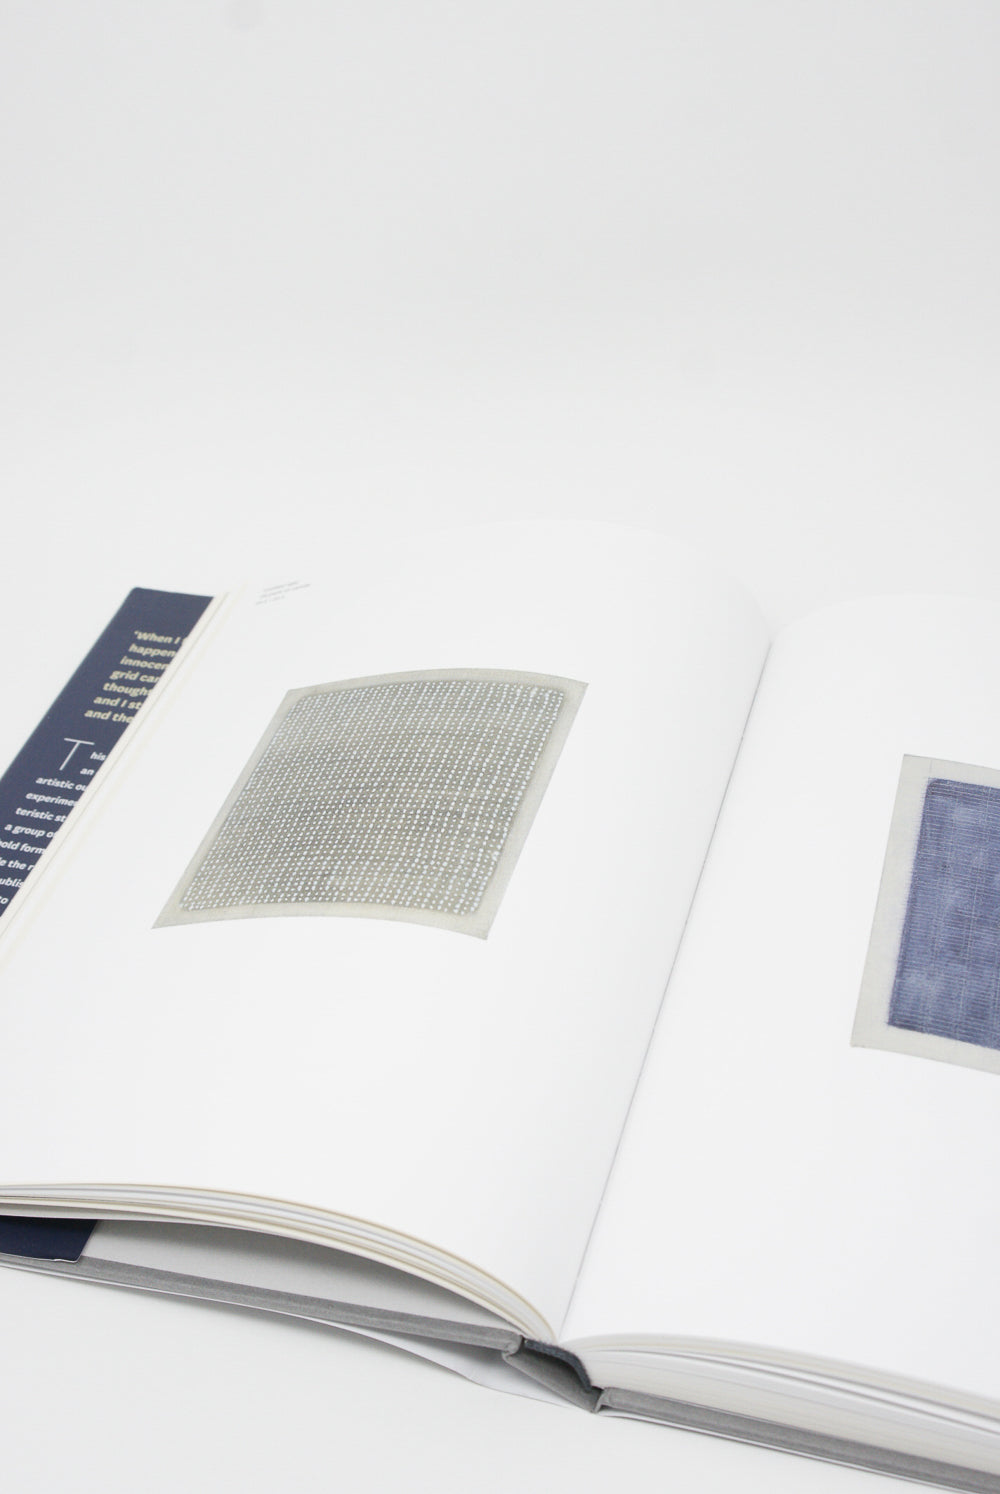 Artbook/D.A.P.'s Agnes Martin retrospective exhibition showcases her artistic career through a book with blue and white squares on a white surface.